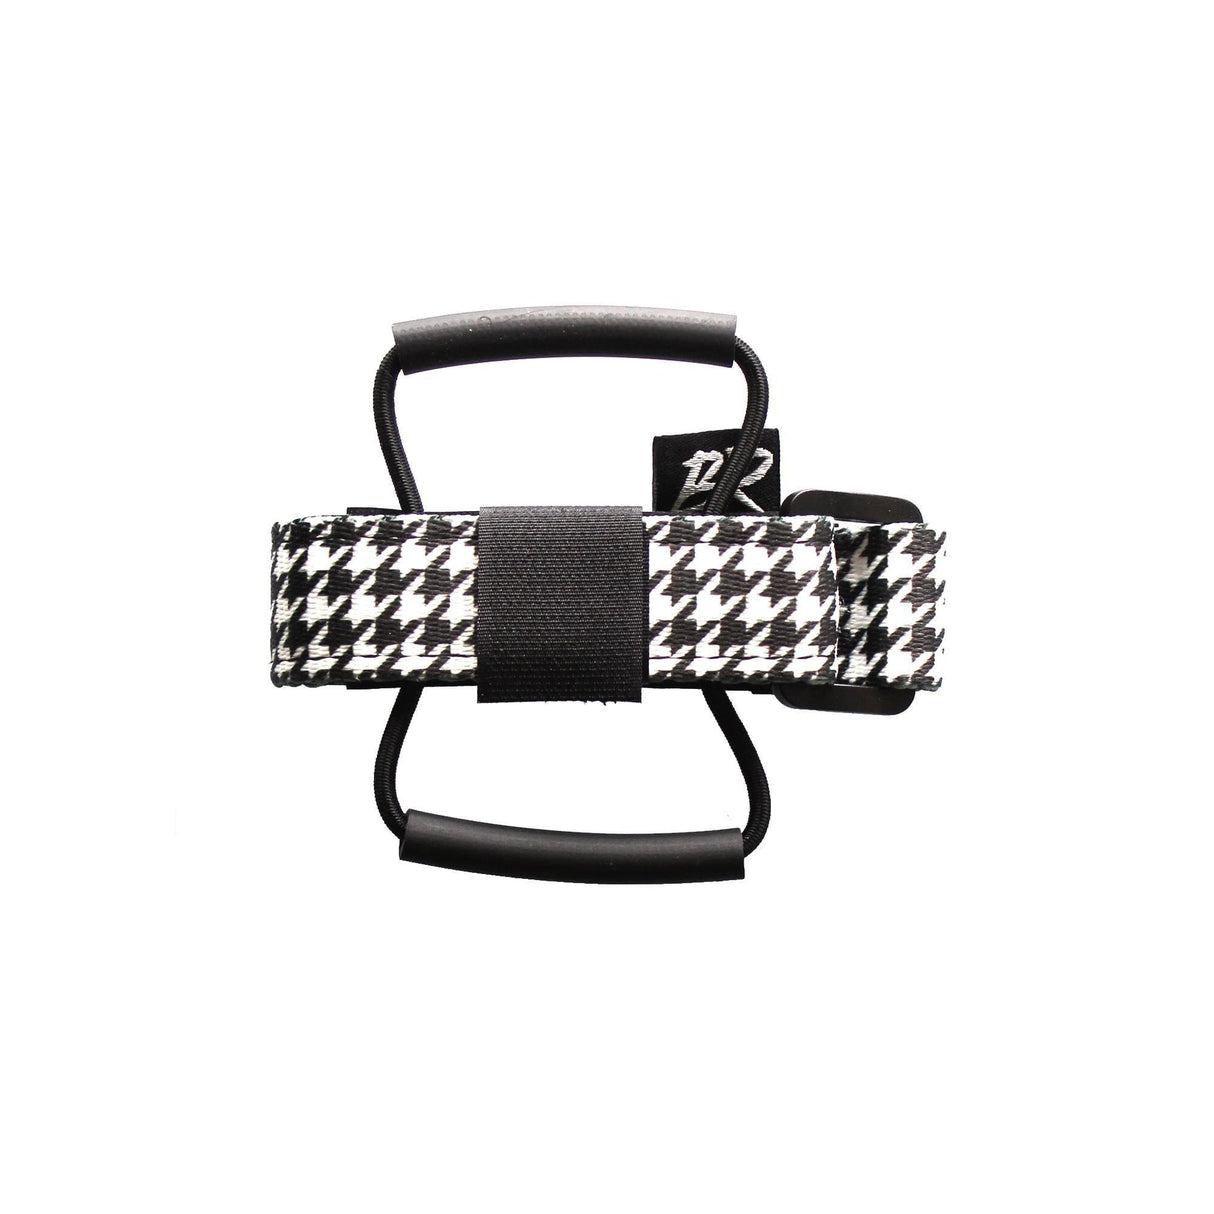 Backcountry Research Race Strap Houndstooth